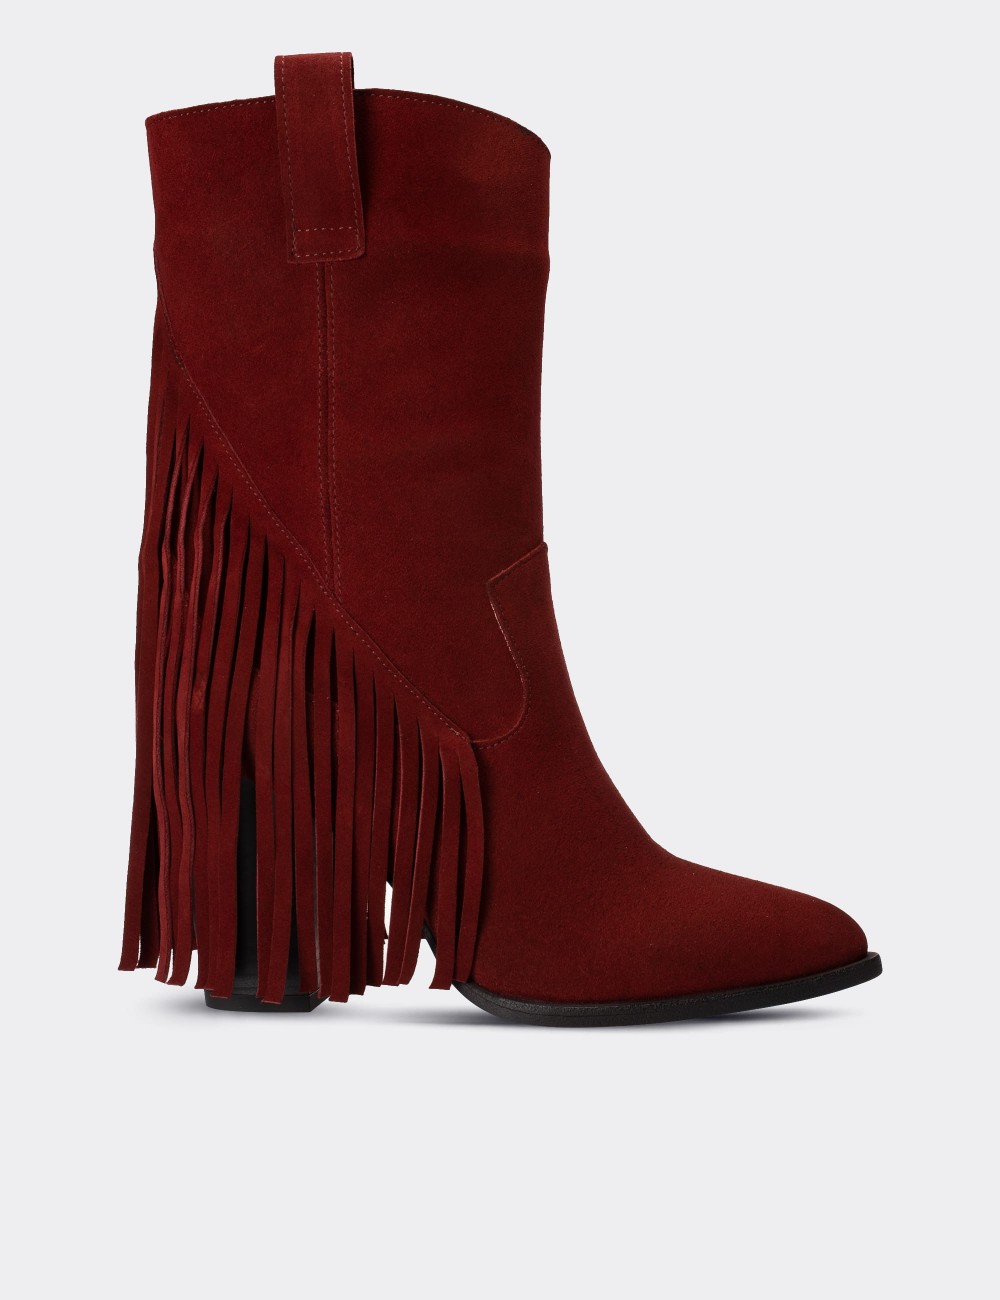 Burgundy Suede Leather Western Boots - E4467ZBRDC01